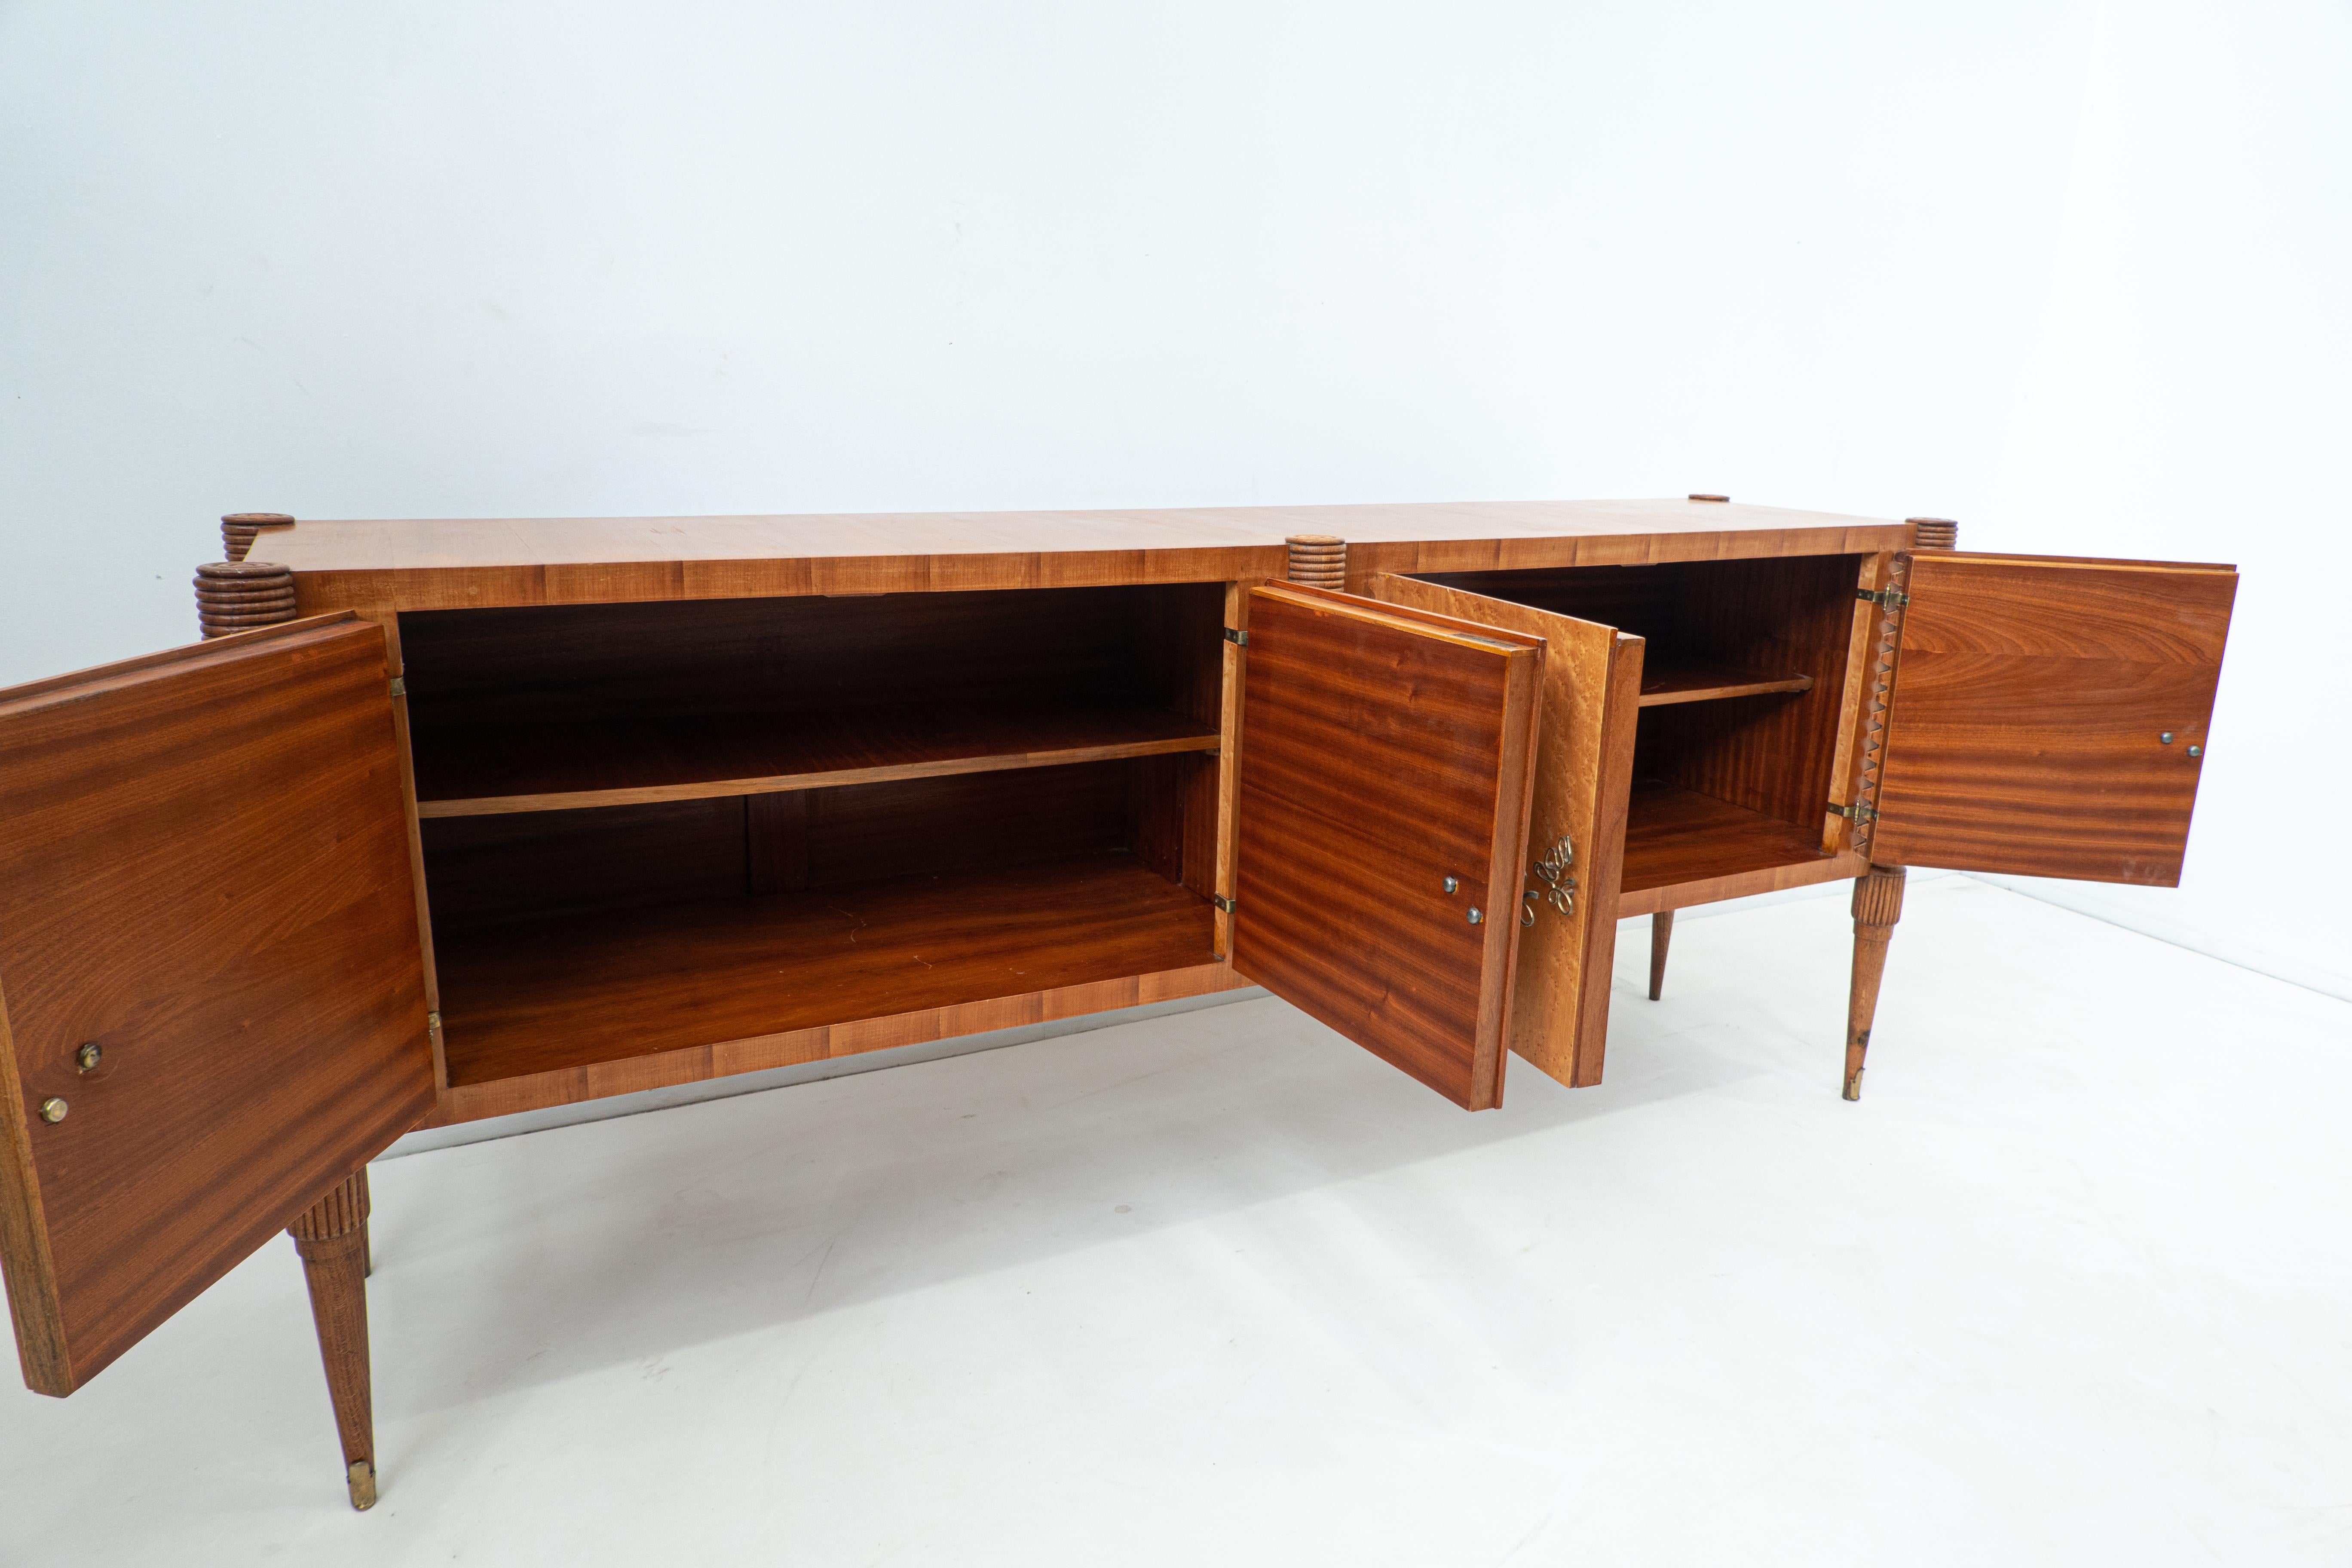 Large Italian Wooden Sideboard by Pier Luigi Colli with Four Doors, 1940s For Sale 5